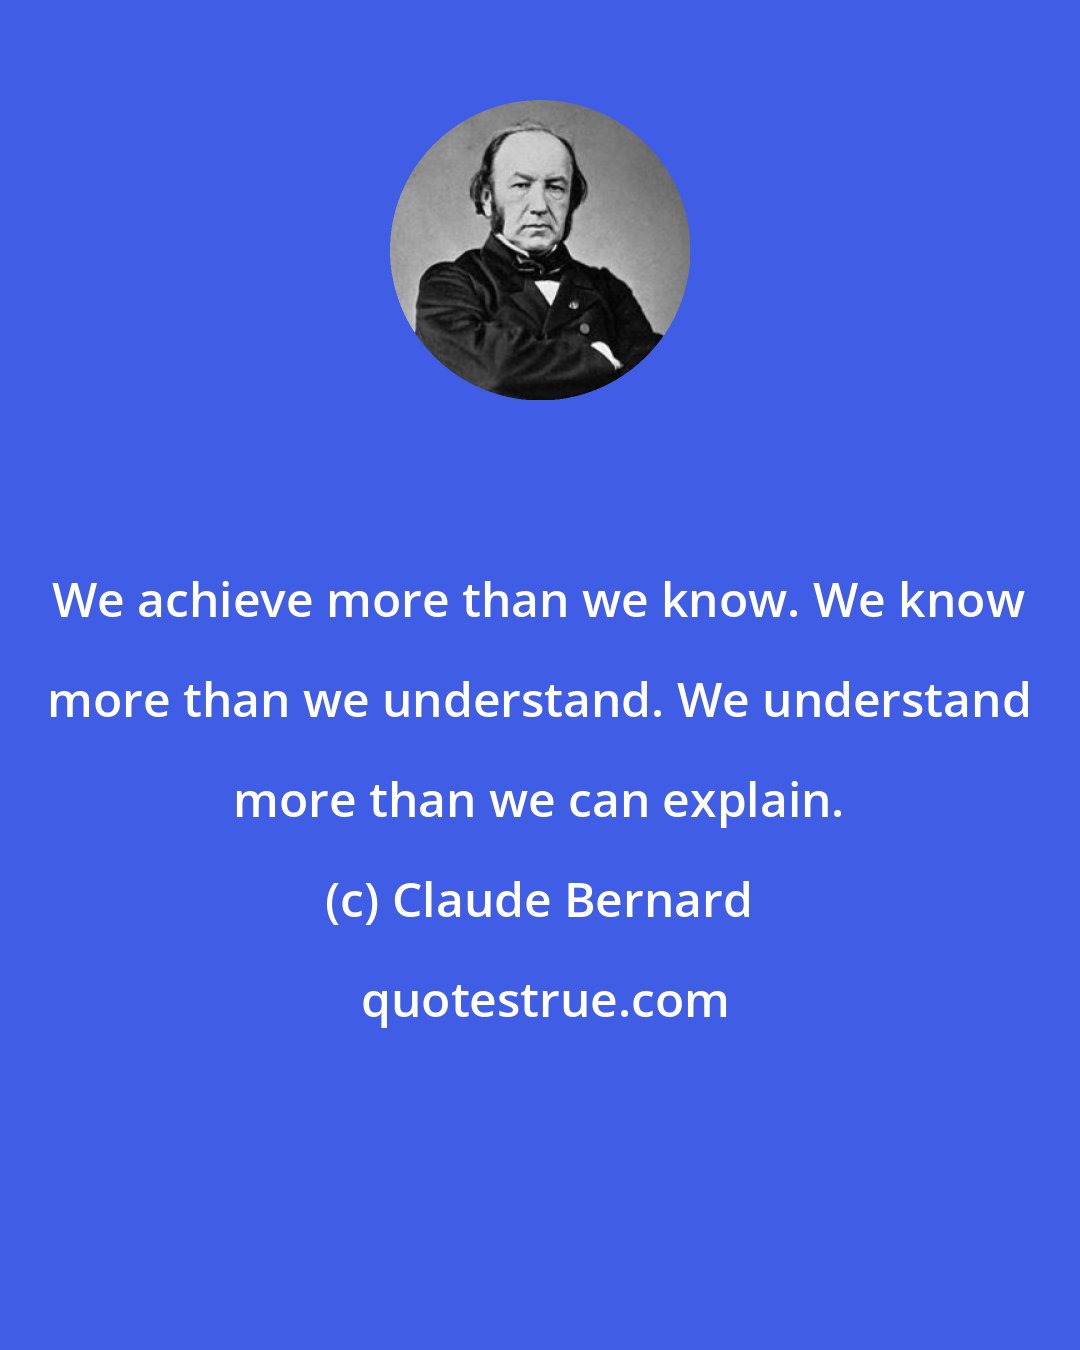 Claude Bernard: We achieve more than we know. We know more than we understand. We understand more than we can explain.